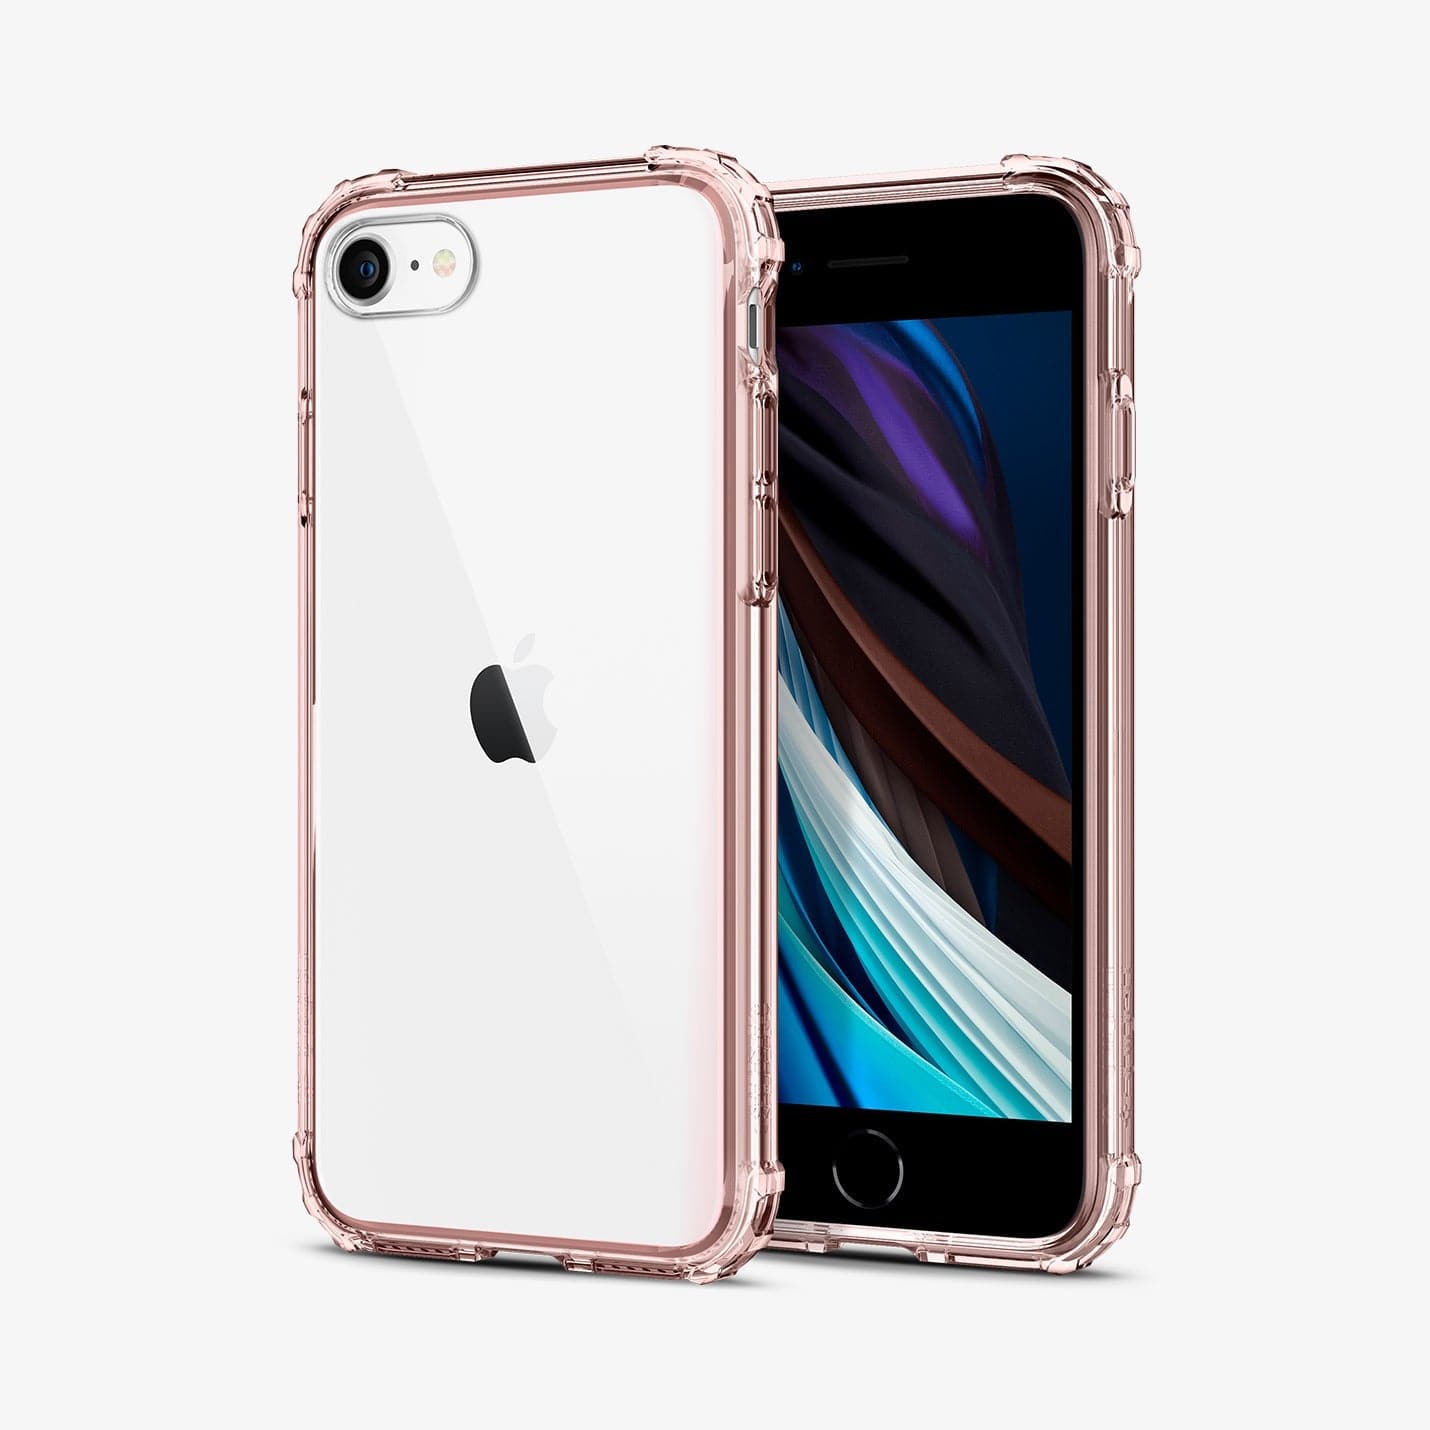 042CS20308 - iPhone 7 Case Crystal Shell in rose crystal showing the back and front